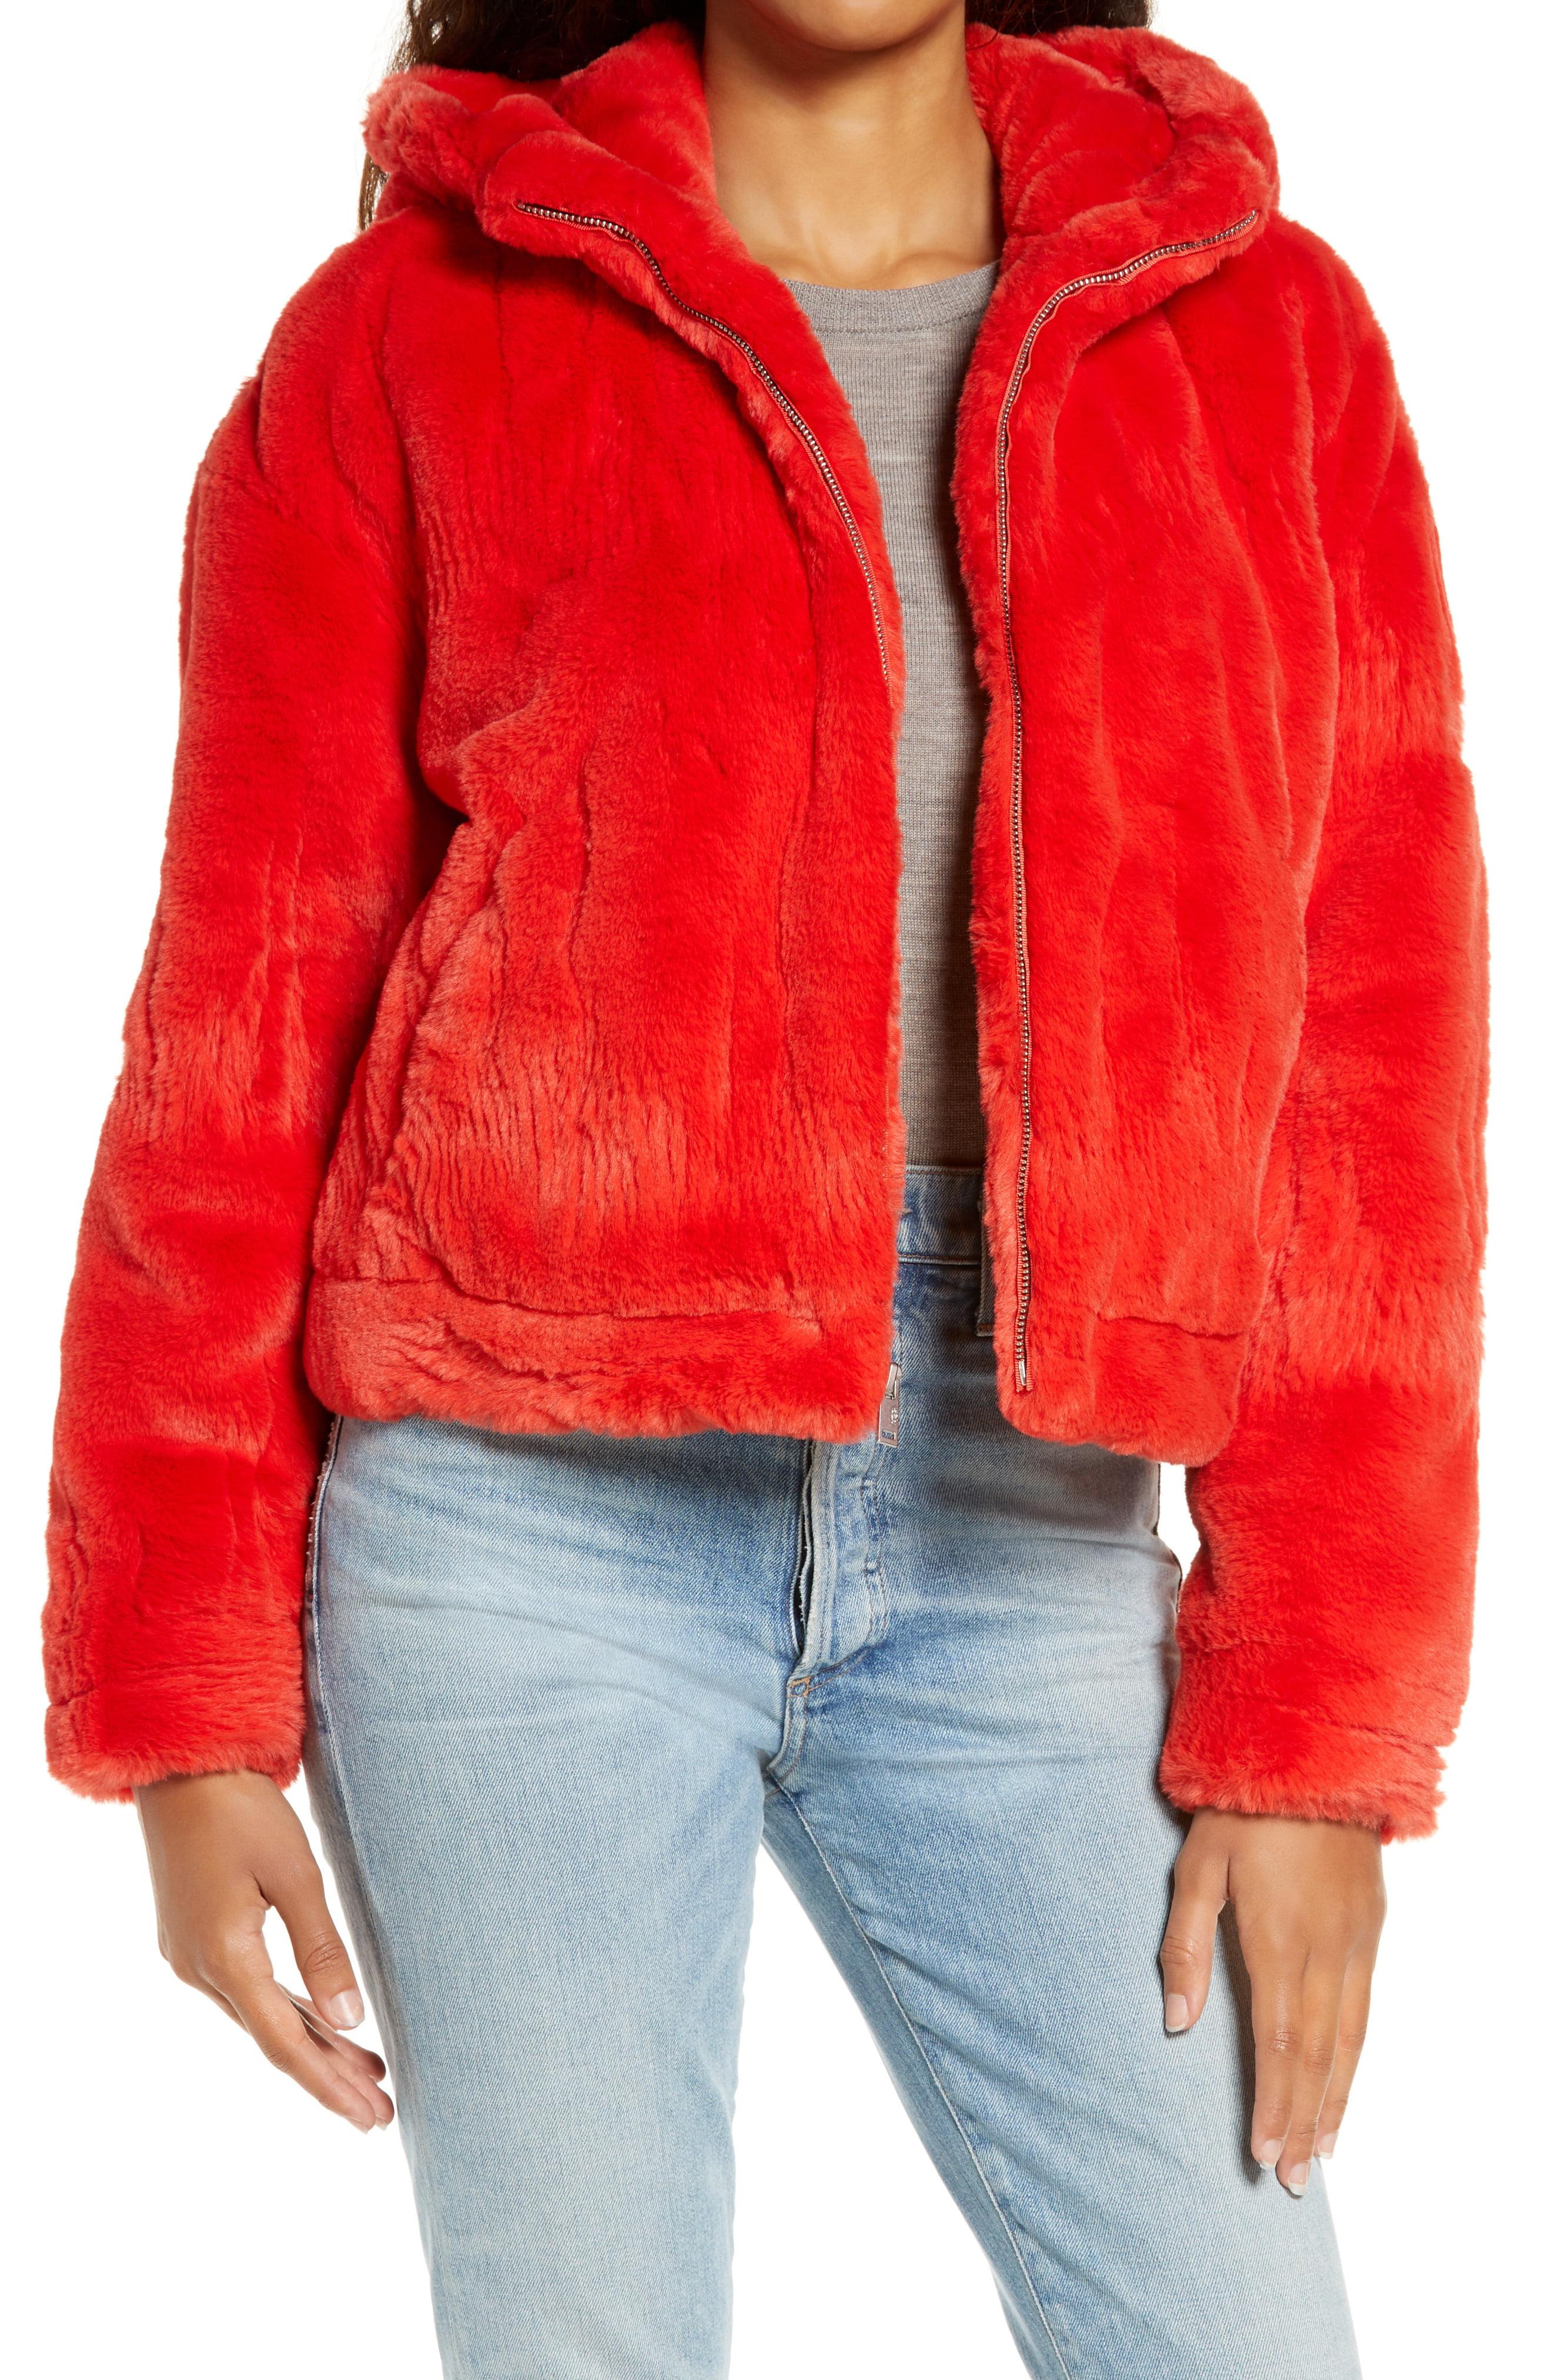 UGG UGG Mandy Faux Fur Hooded Jacket in Red - Lyst